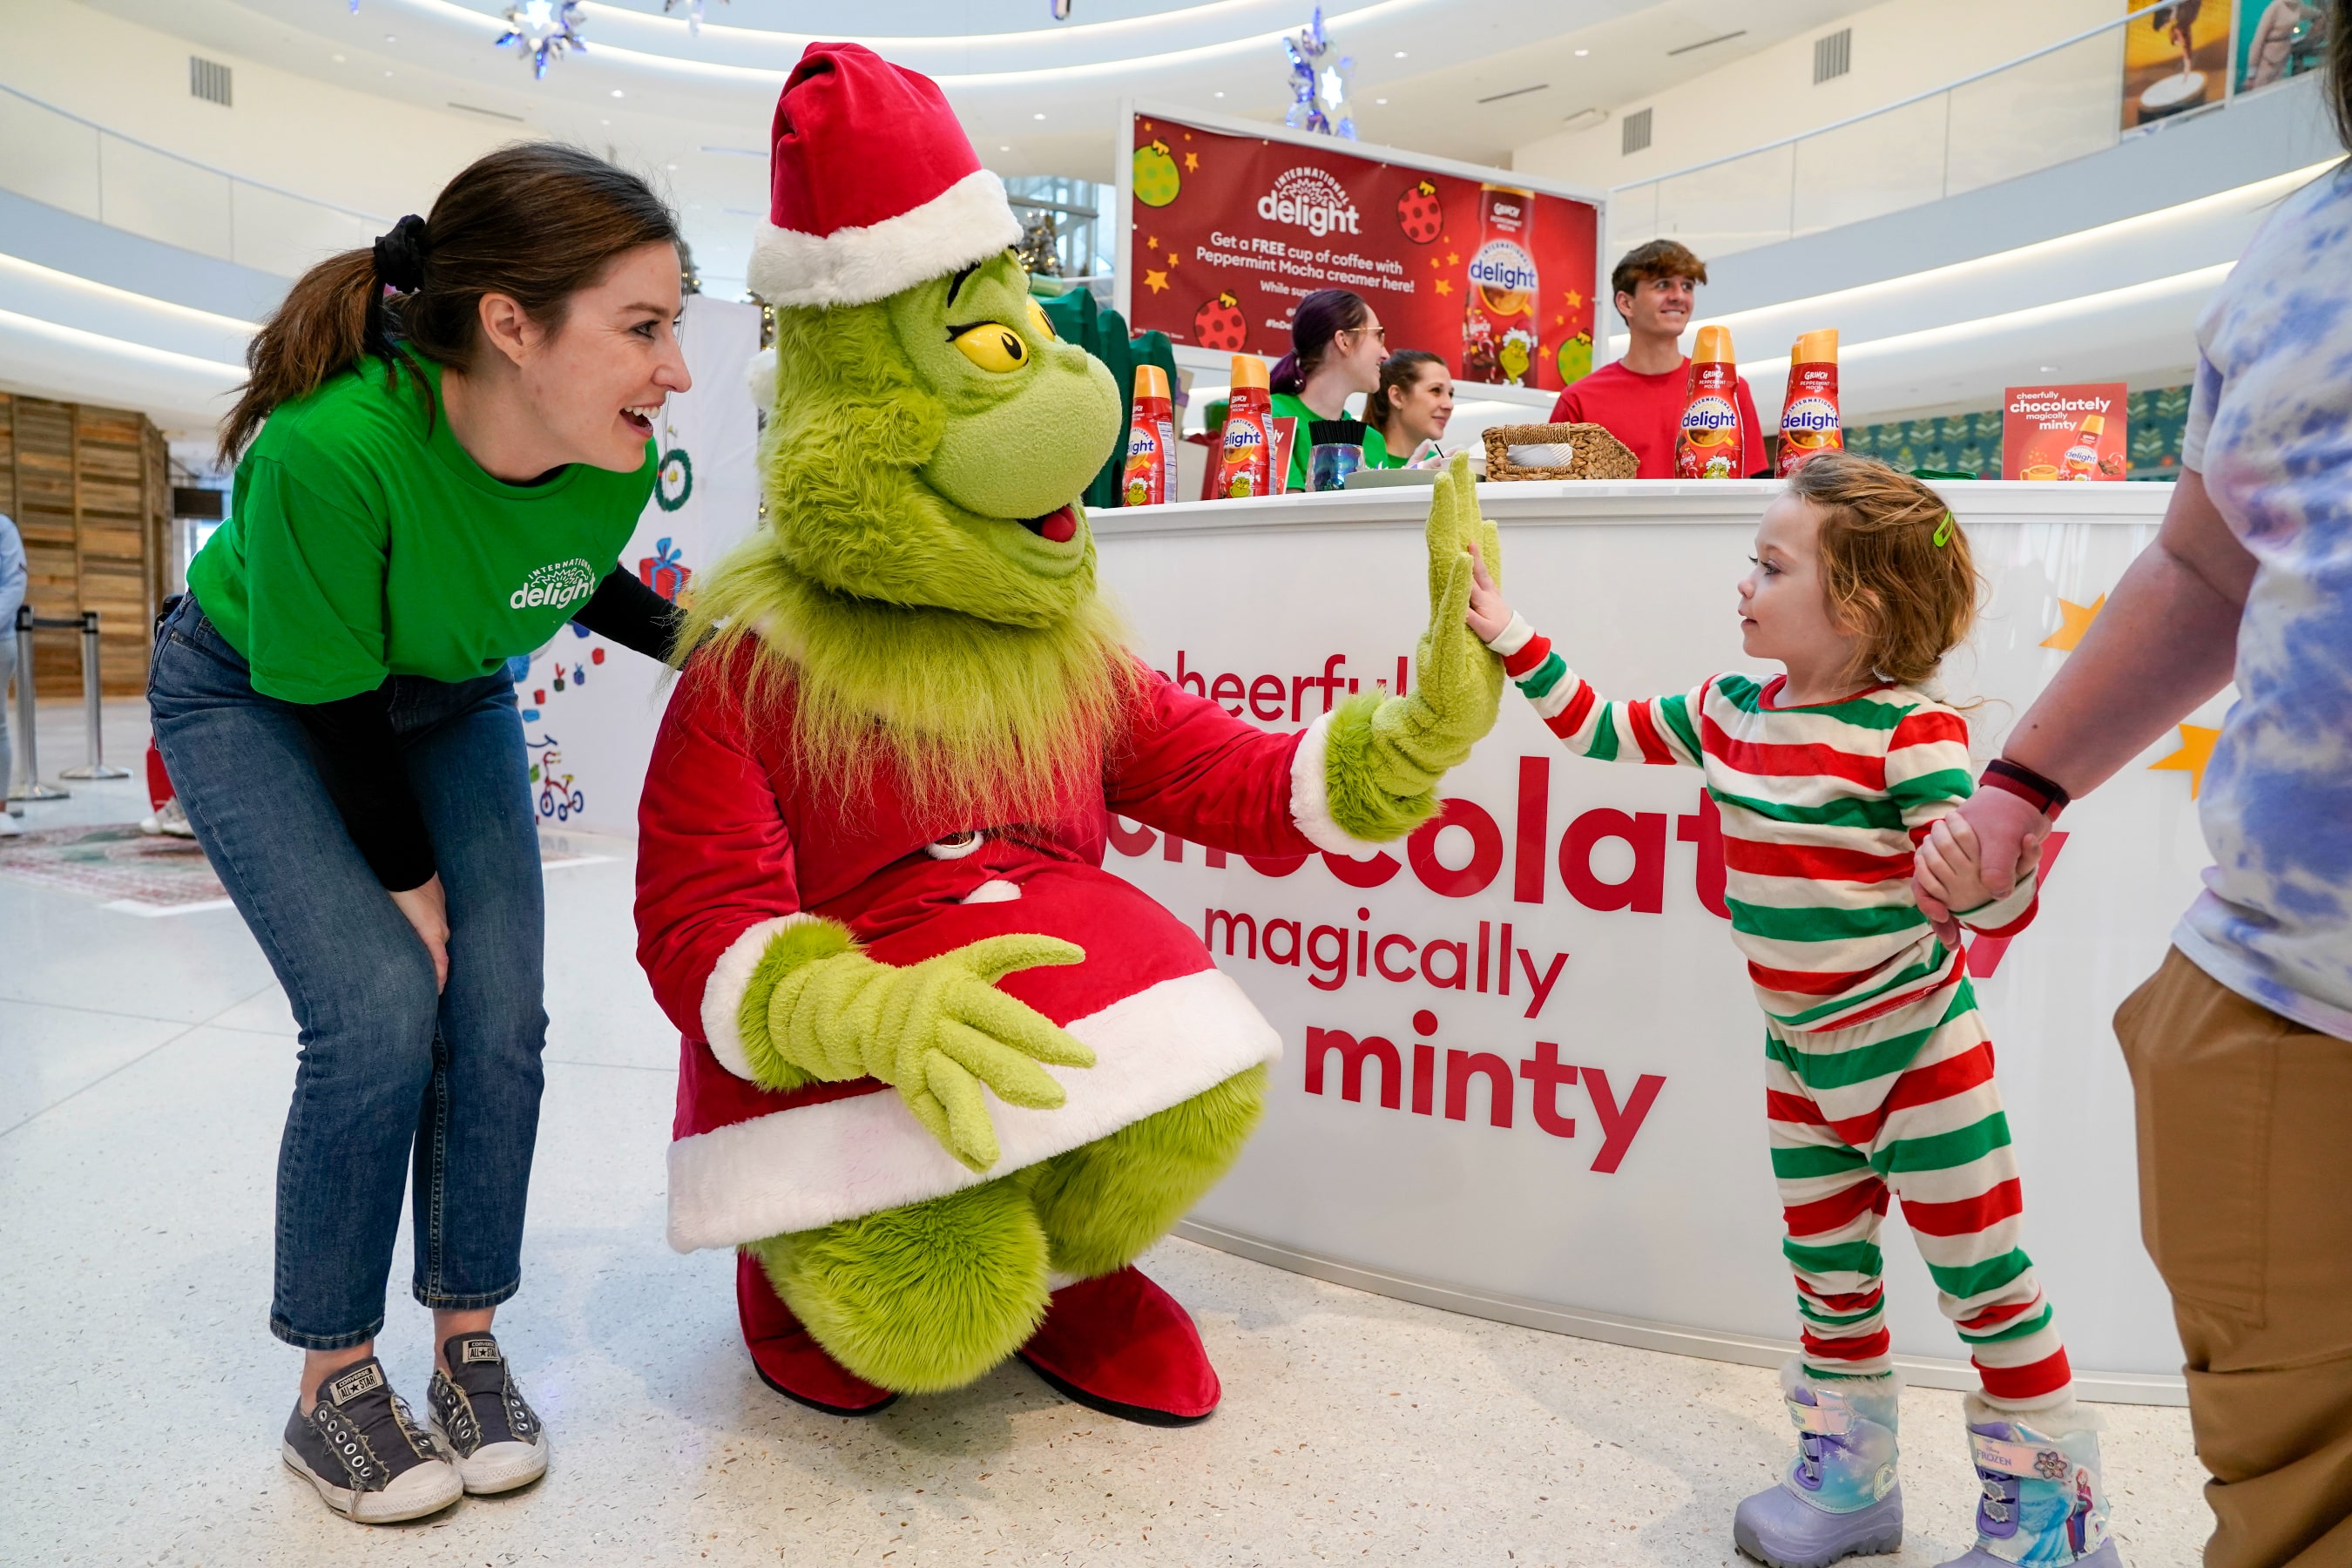 Evelynn Taylor, 4, high fives the Grinch, who was at Mall of America on Thursday, Dec. 8, 2022, serving up free coffee with International Delight Grinch Peppermint Mocha creamer.